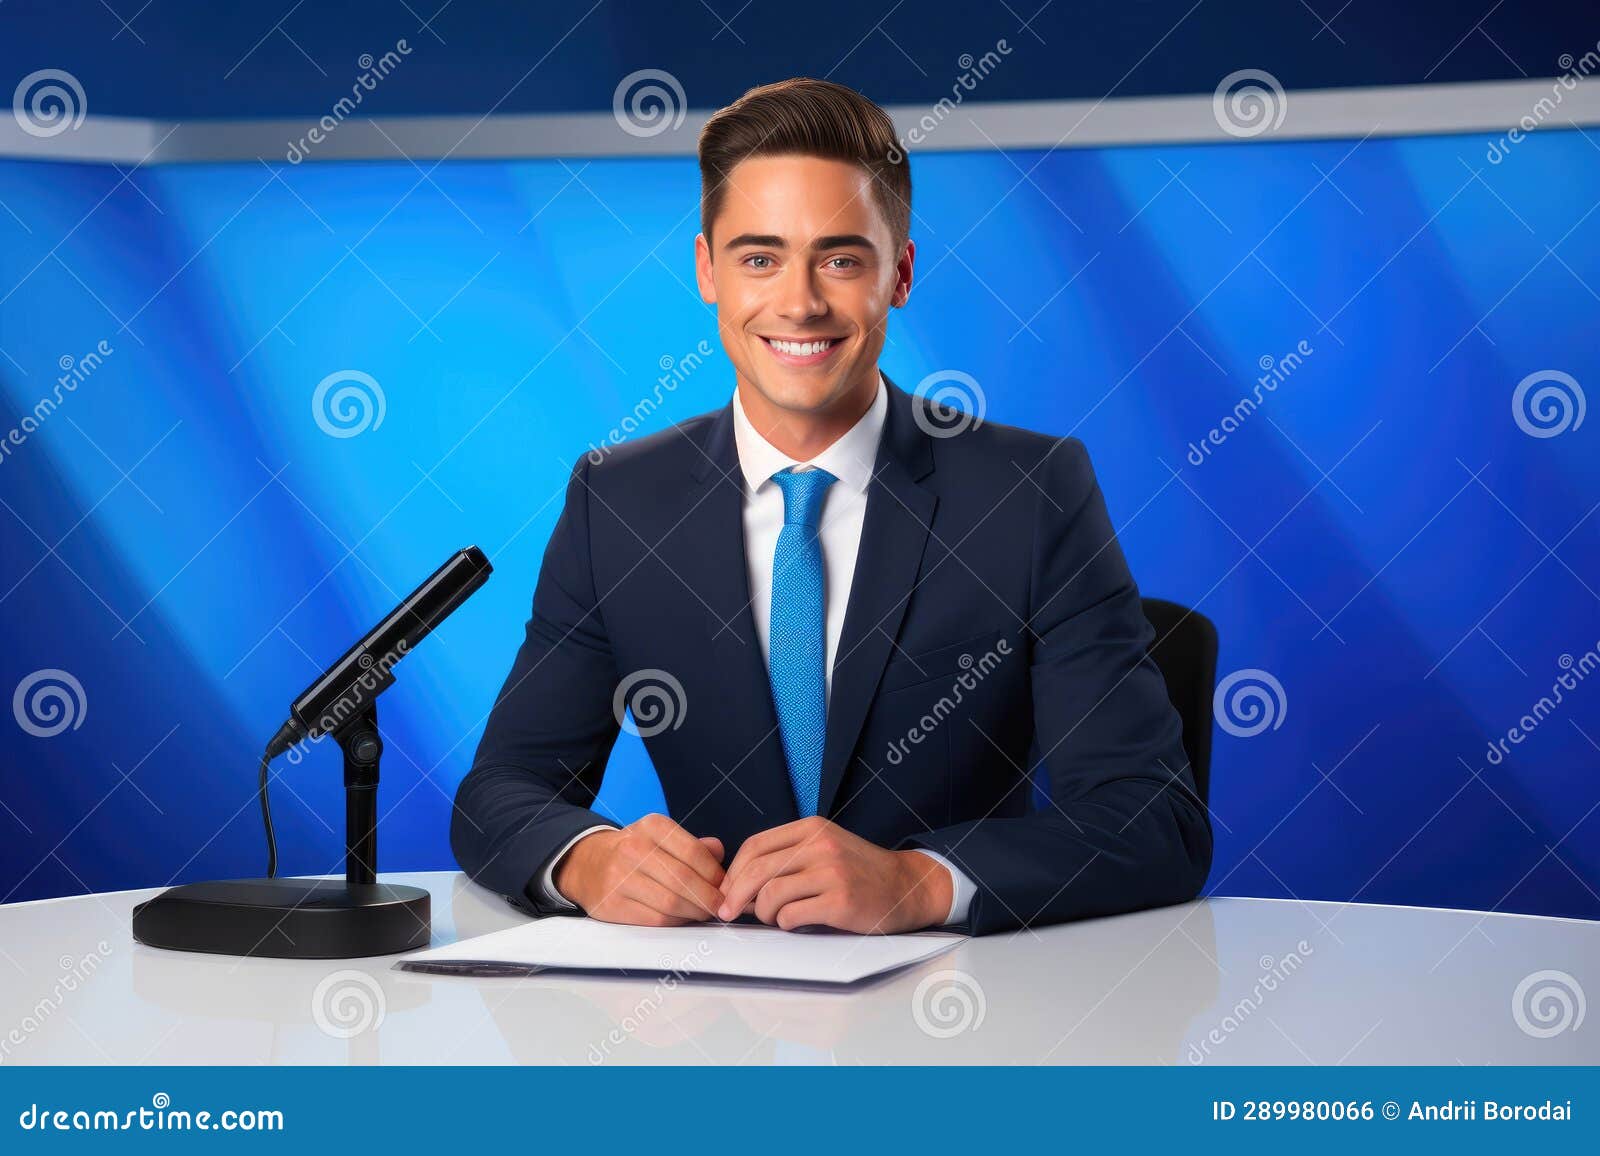 Professional News Anchor Reporting Live on TV. Stock Illustration ...